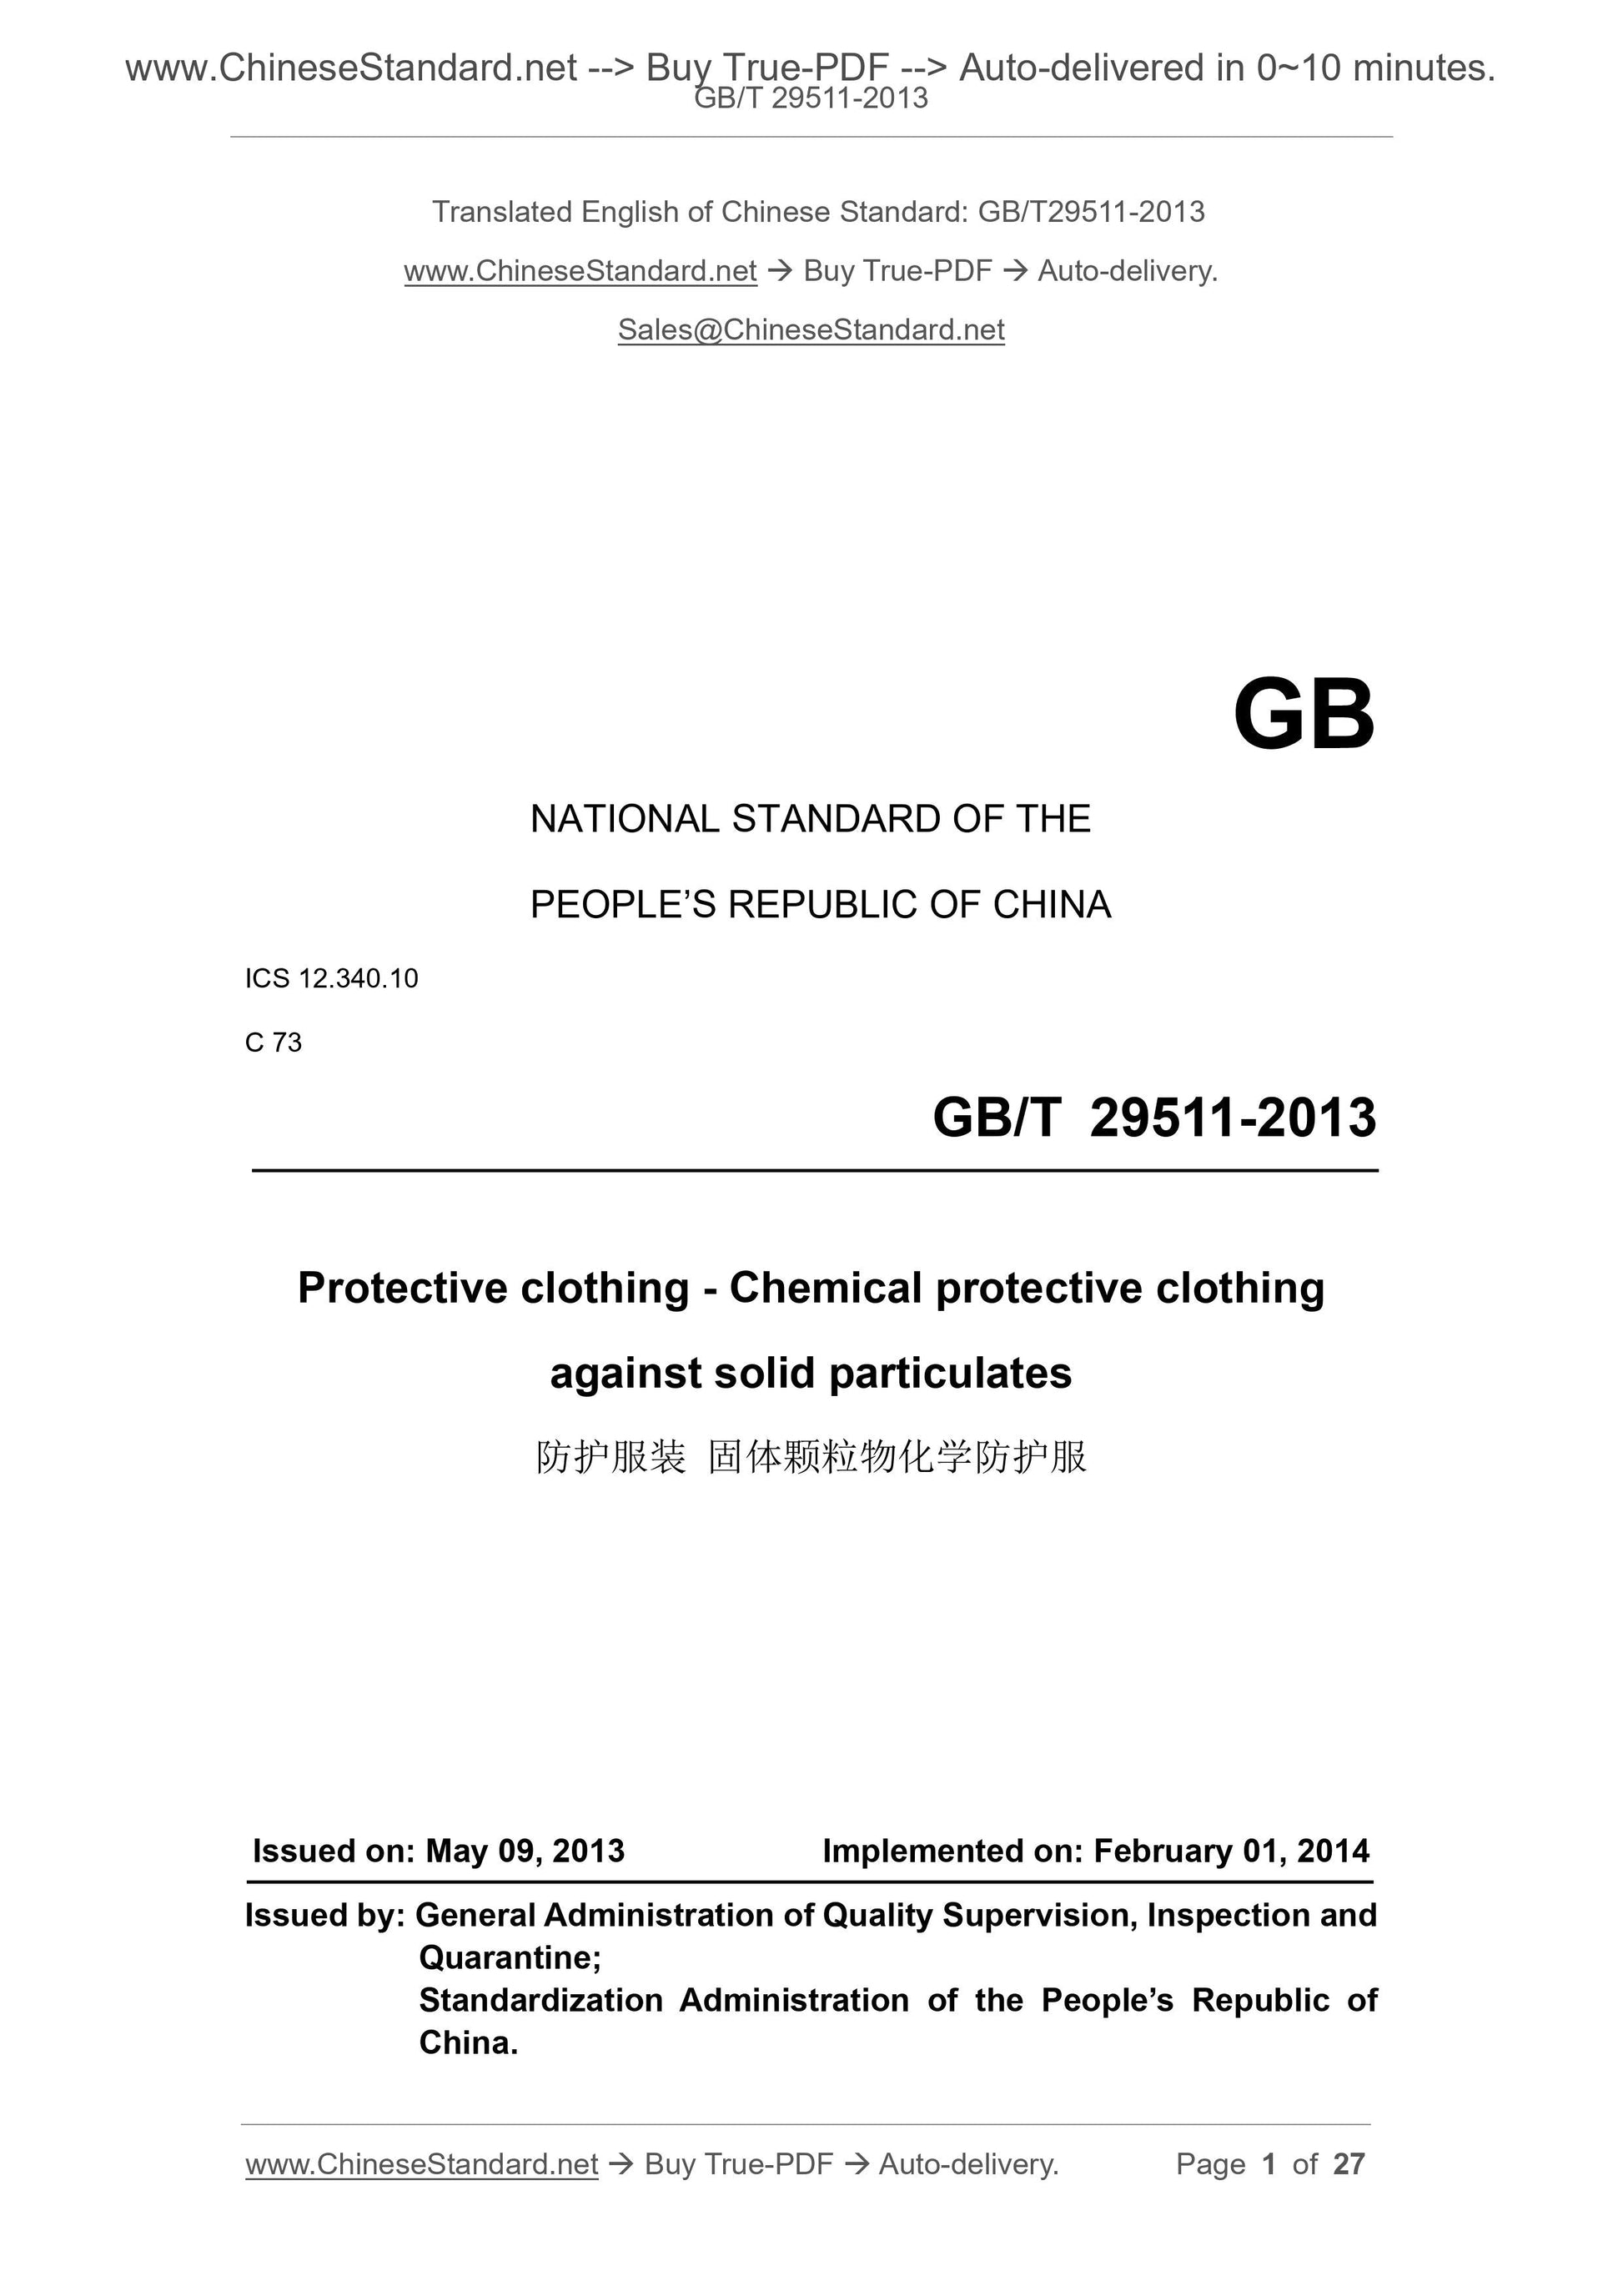 GB/T 29511-2013 Page 1